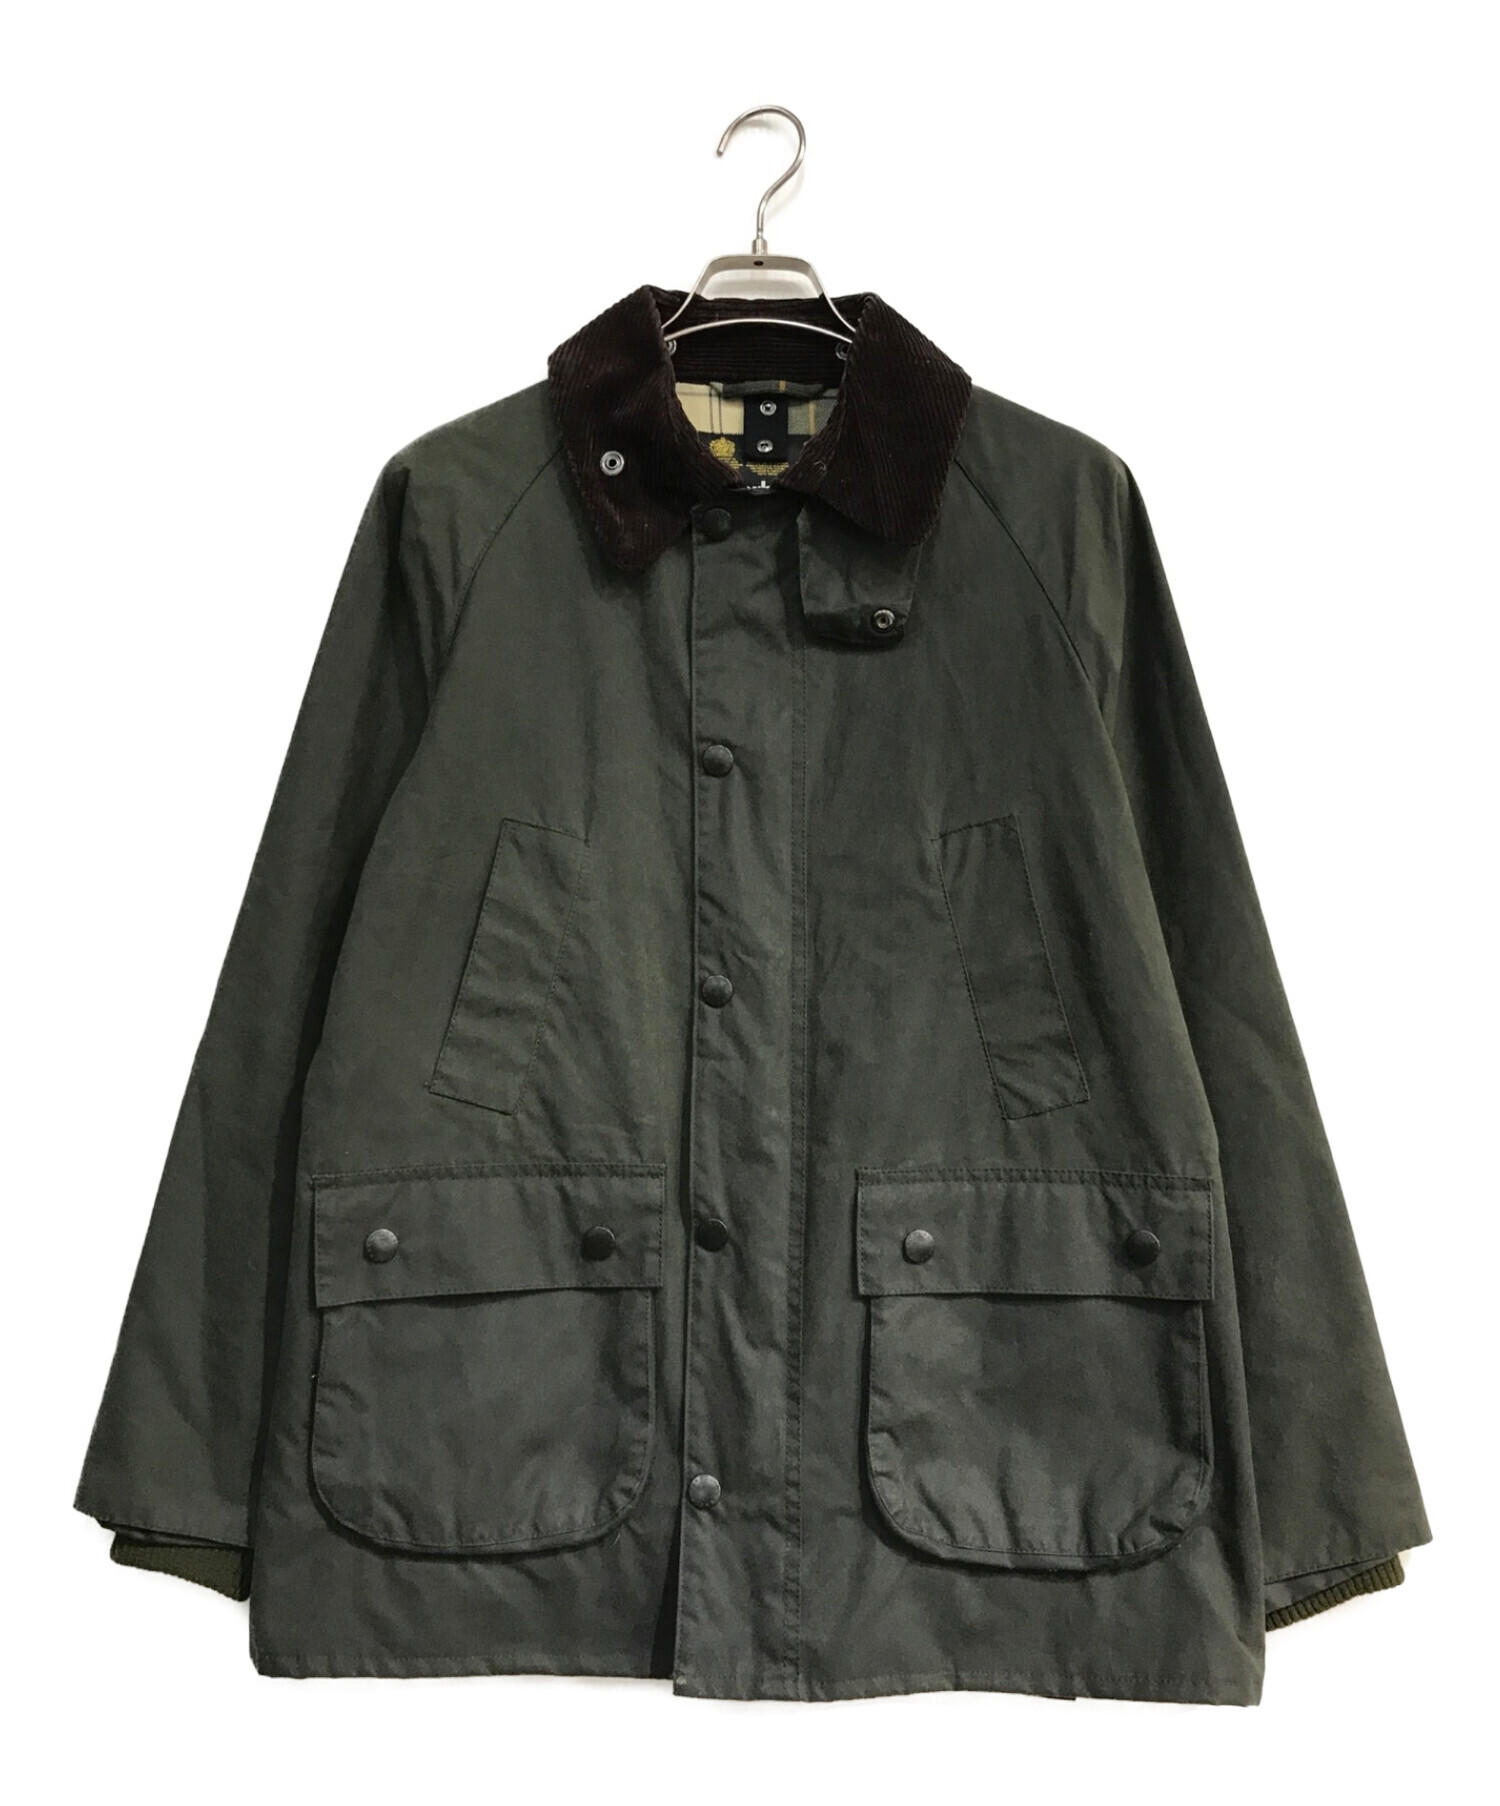 Barbour バブアー 38カーキ BEDALE SL ビデイル